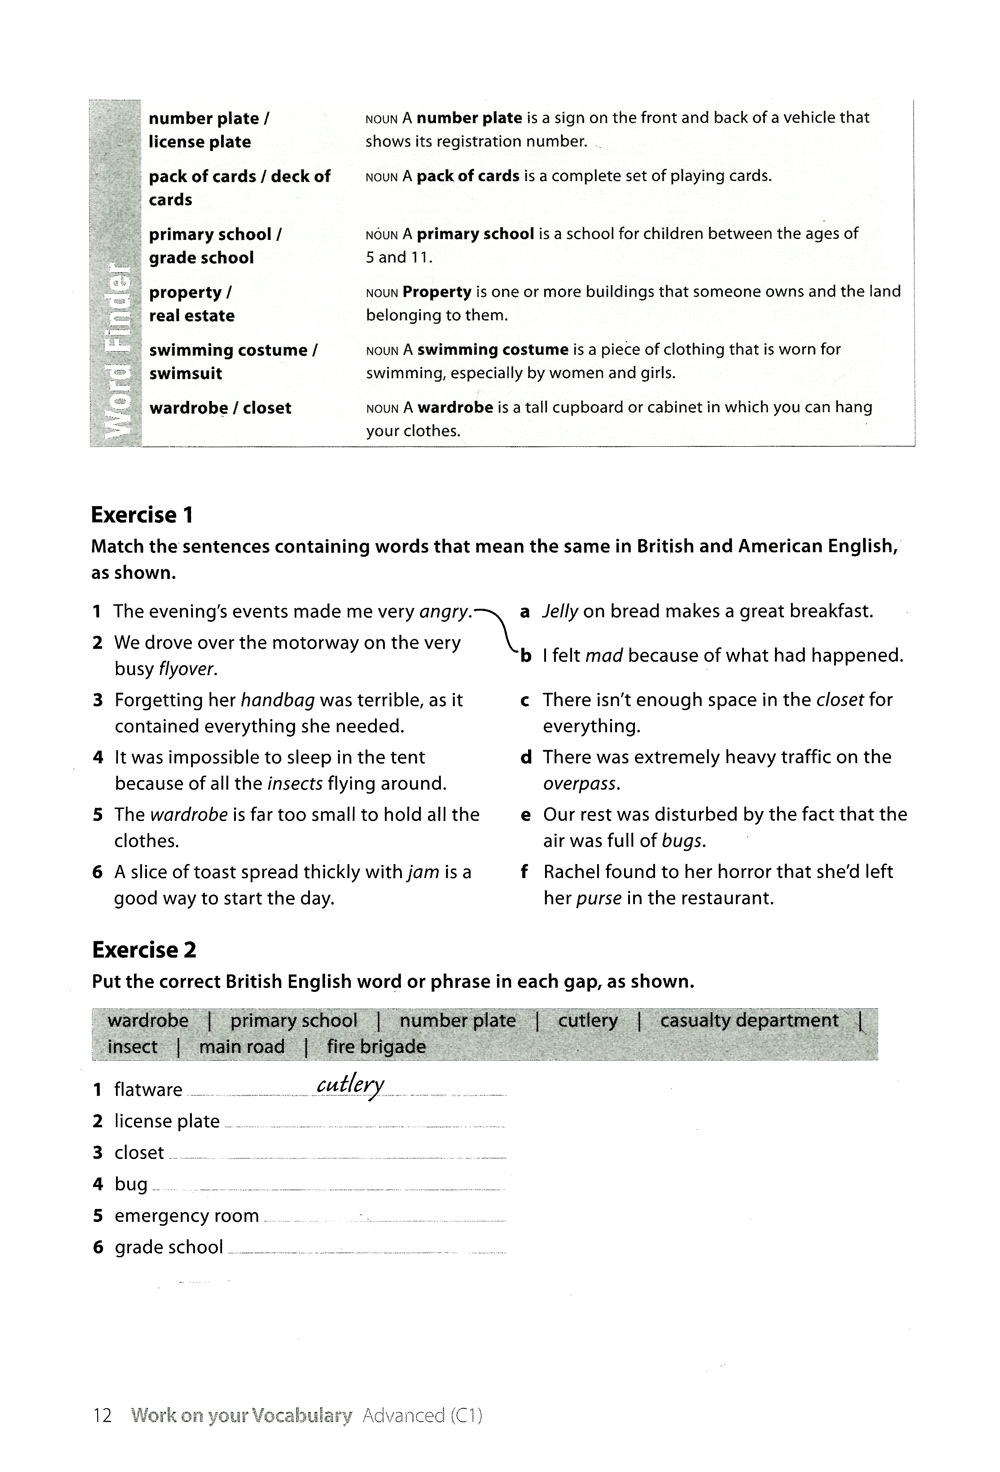 Collins - Work On Your Vocabulary - Advanced C1 PDF